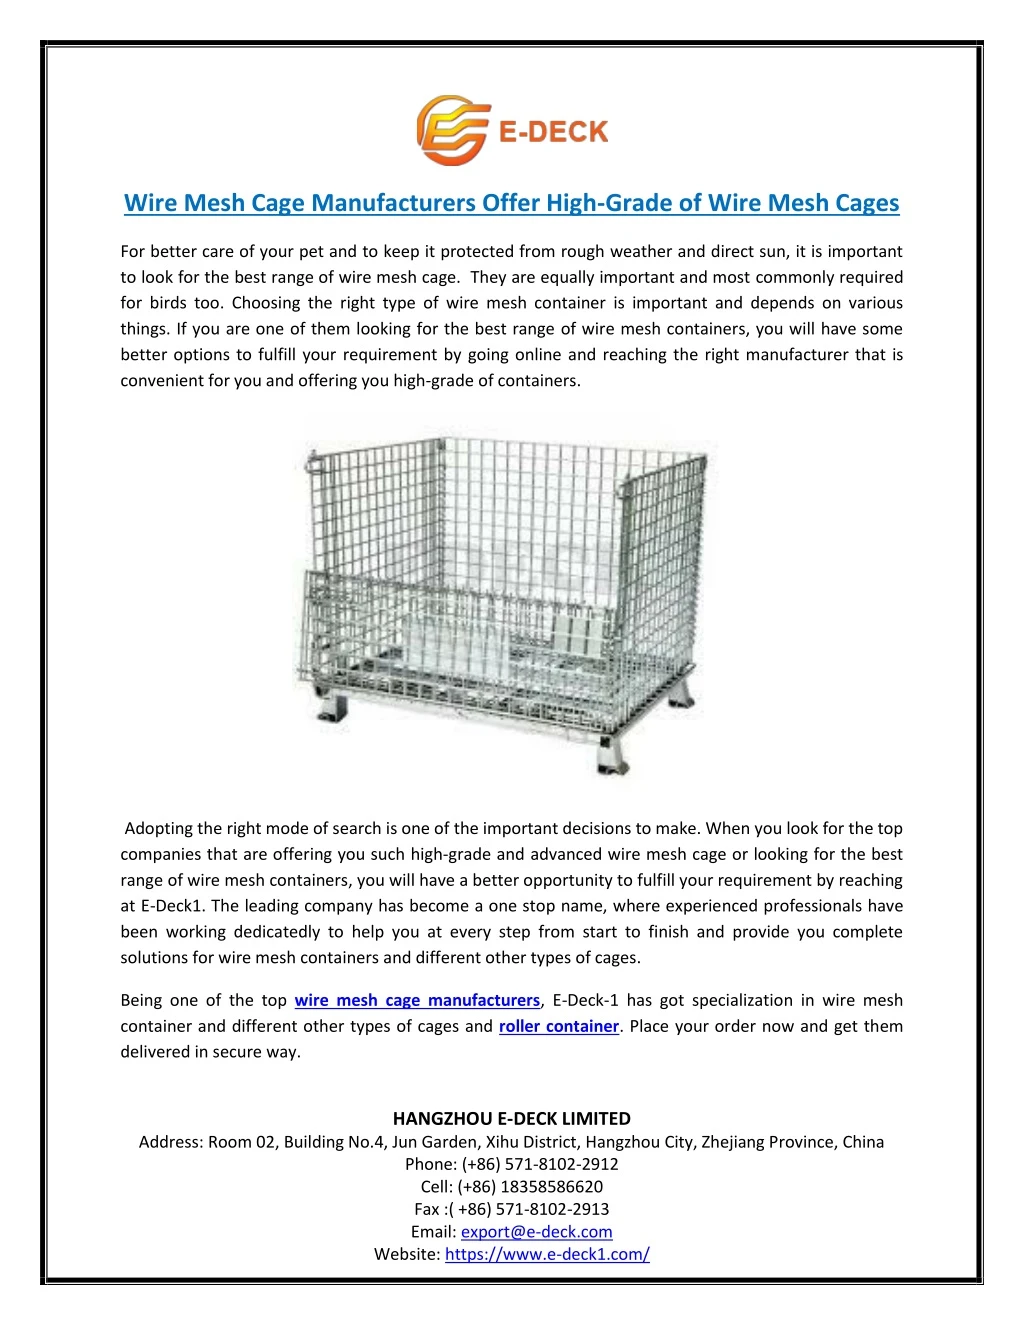 wire mesh cage manufacturers offer high grade